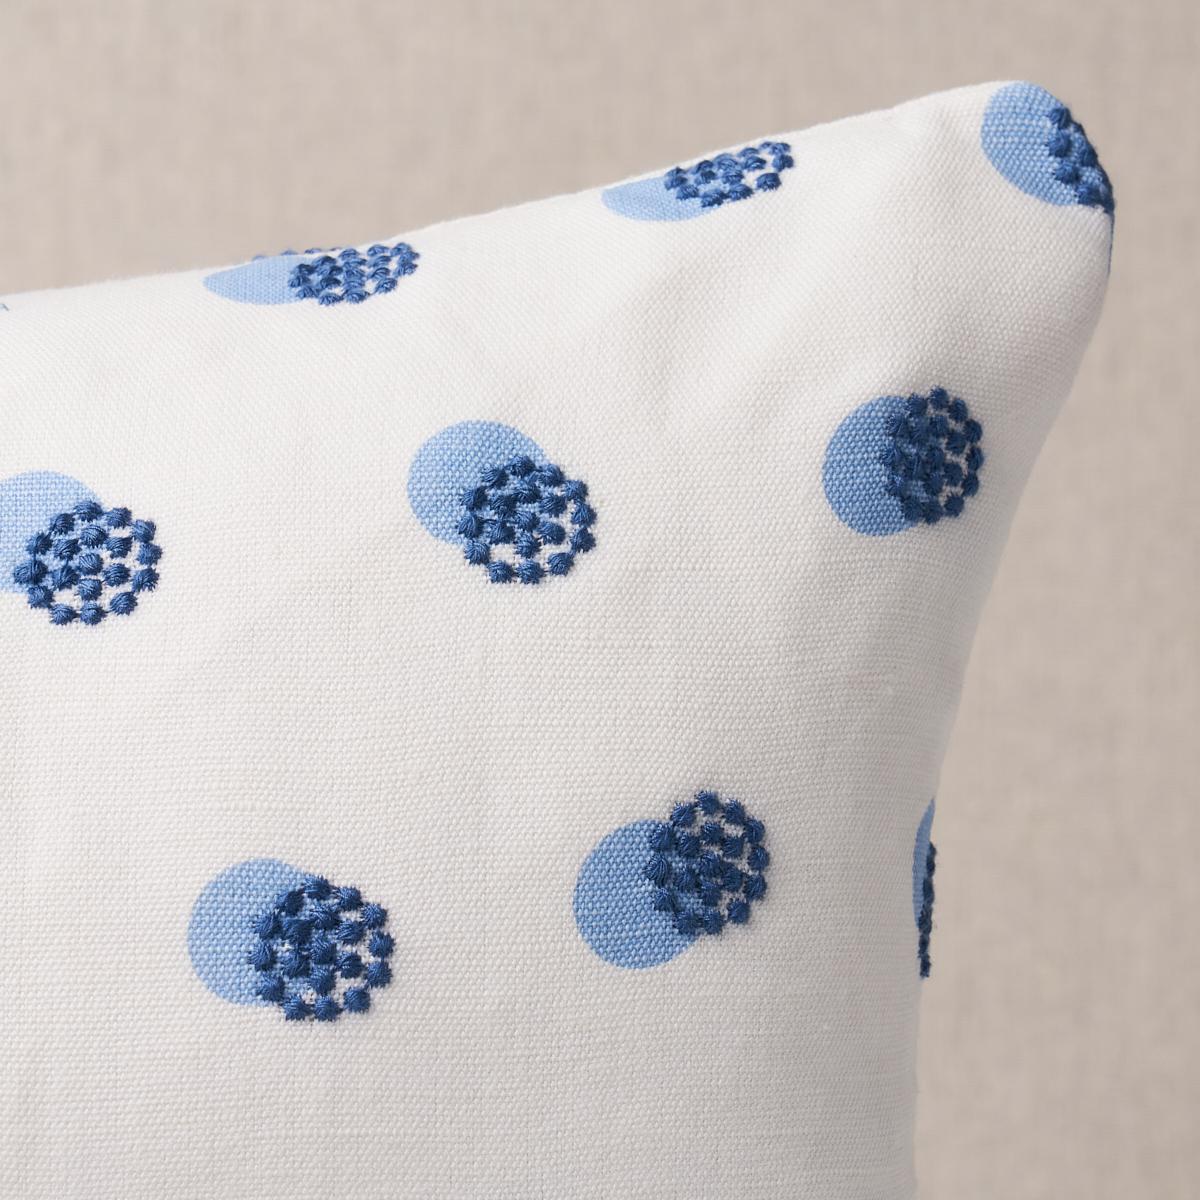 This pillow features Taylor Embroidery with a knife edge finish. Taylor Embroidery in sky-on-navy artfully combines a few simple elements—bursts of offset French knots embroidered over a field of hand-screened dots—for a linen fabric that’s visually